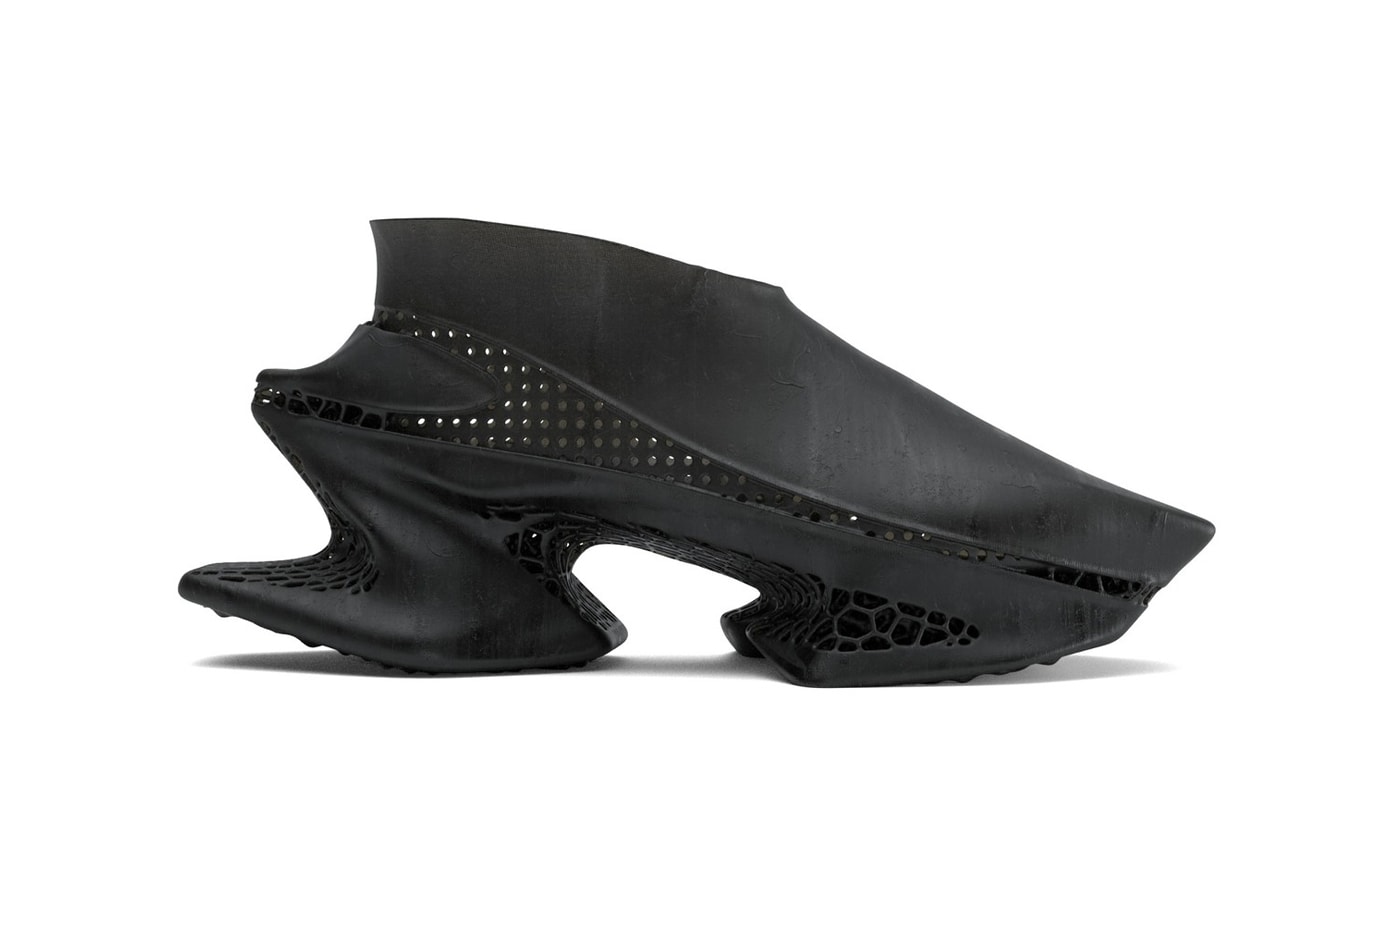 SCRY 3d printing stela black basic erosion shoe collection toughness softness release info price 